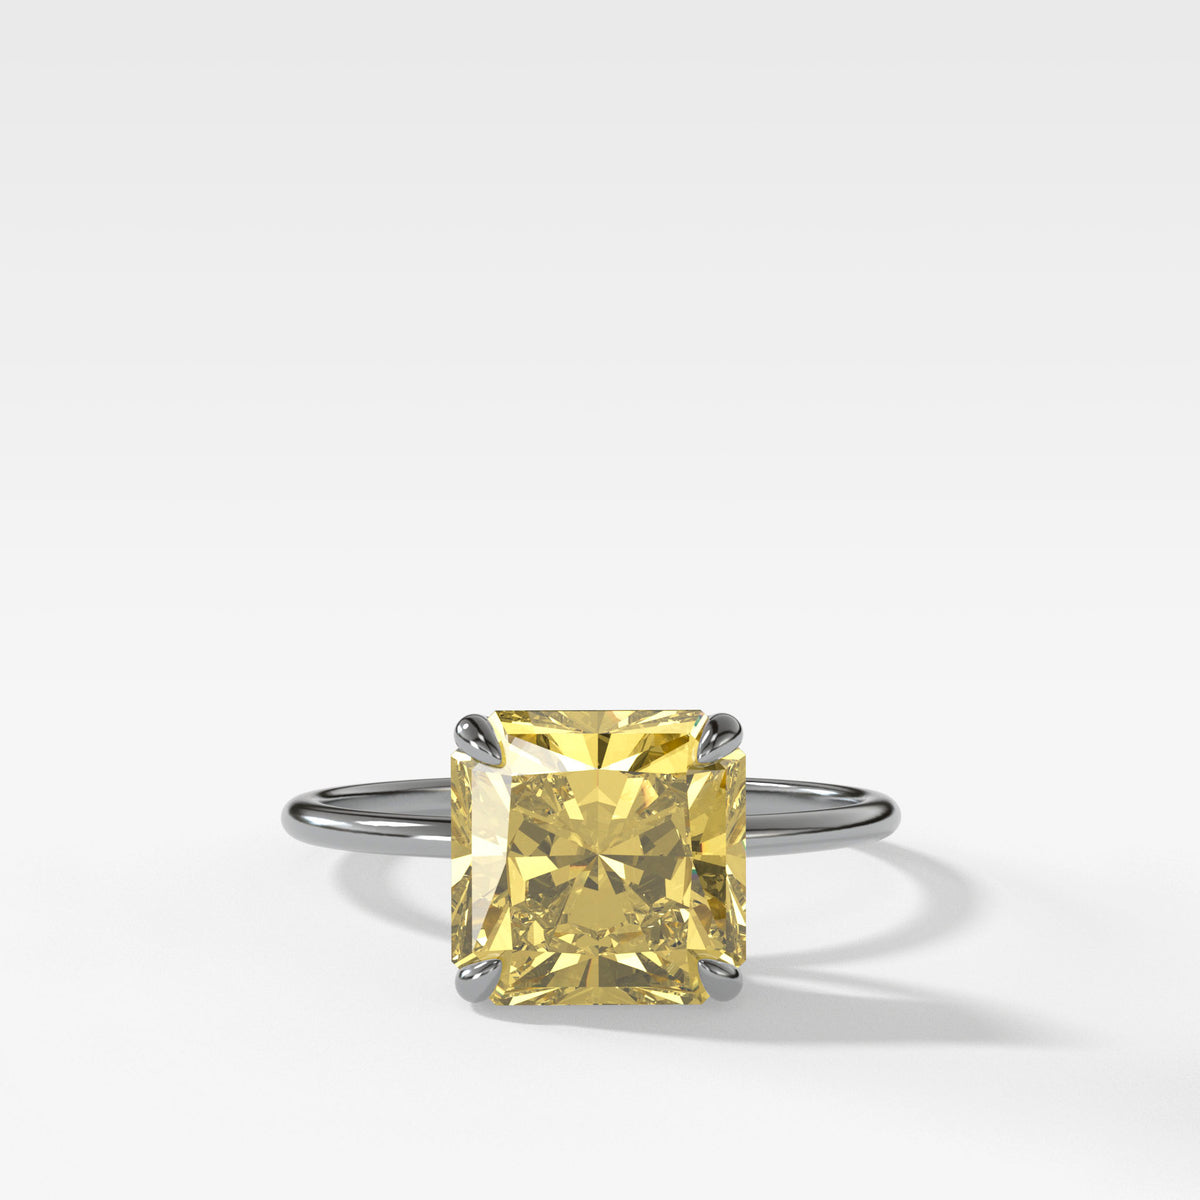 Thin + Simple Solitaire Engagement Ring With Canary Yellow Radiant Cut Diamond